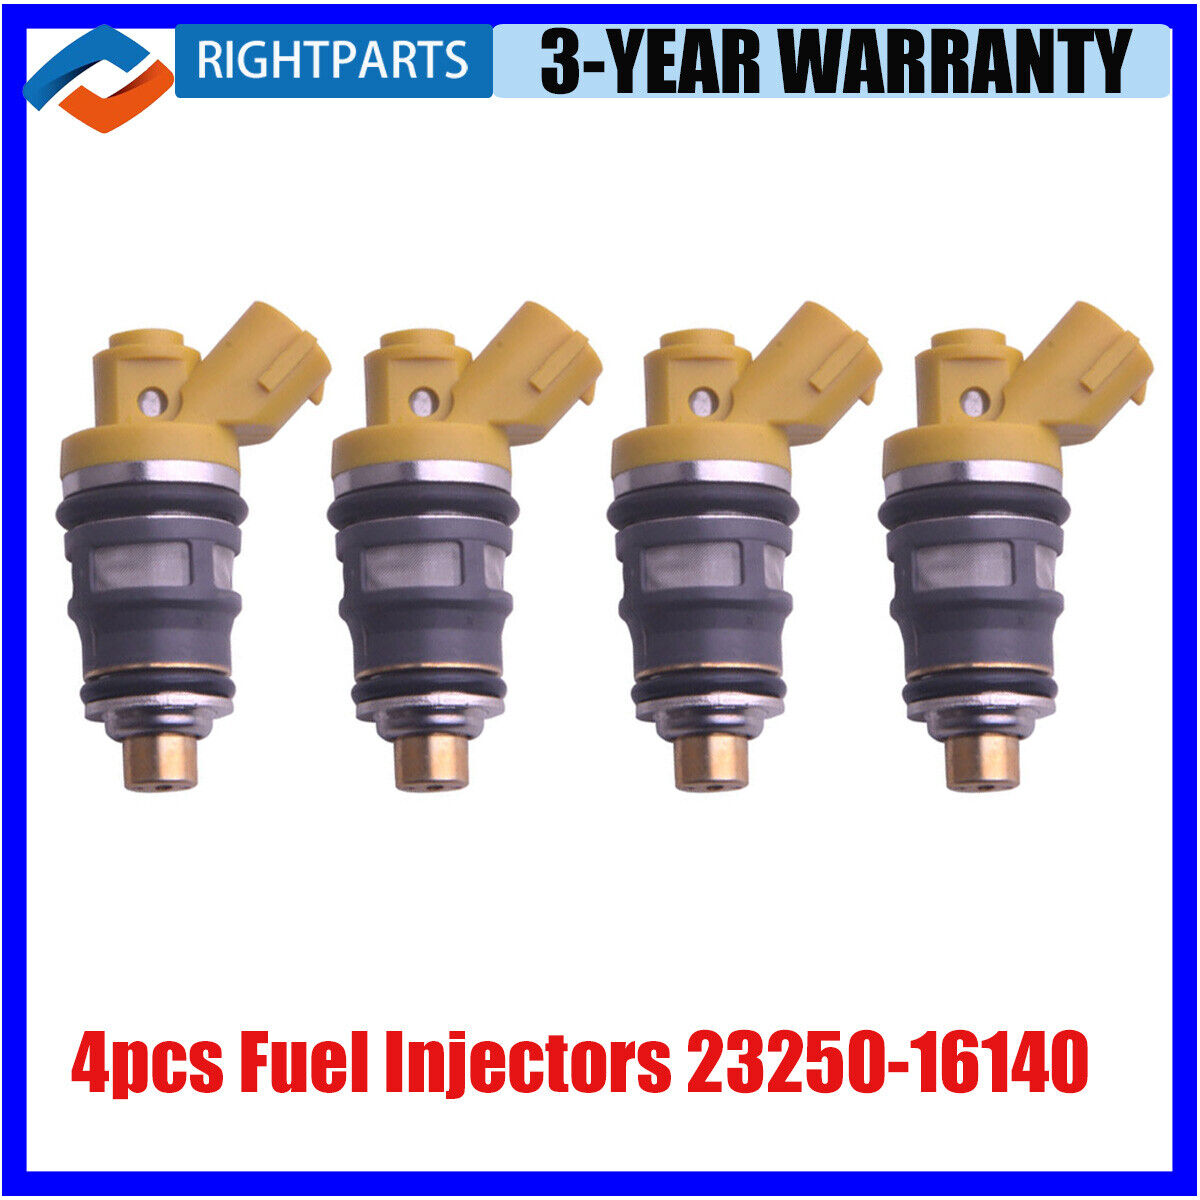 4pcs Fuel Injector 23250-16140 for Toyota Corolla LVN AE101 AE111 Carina AT210